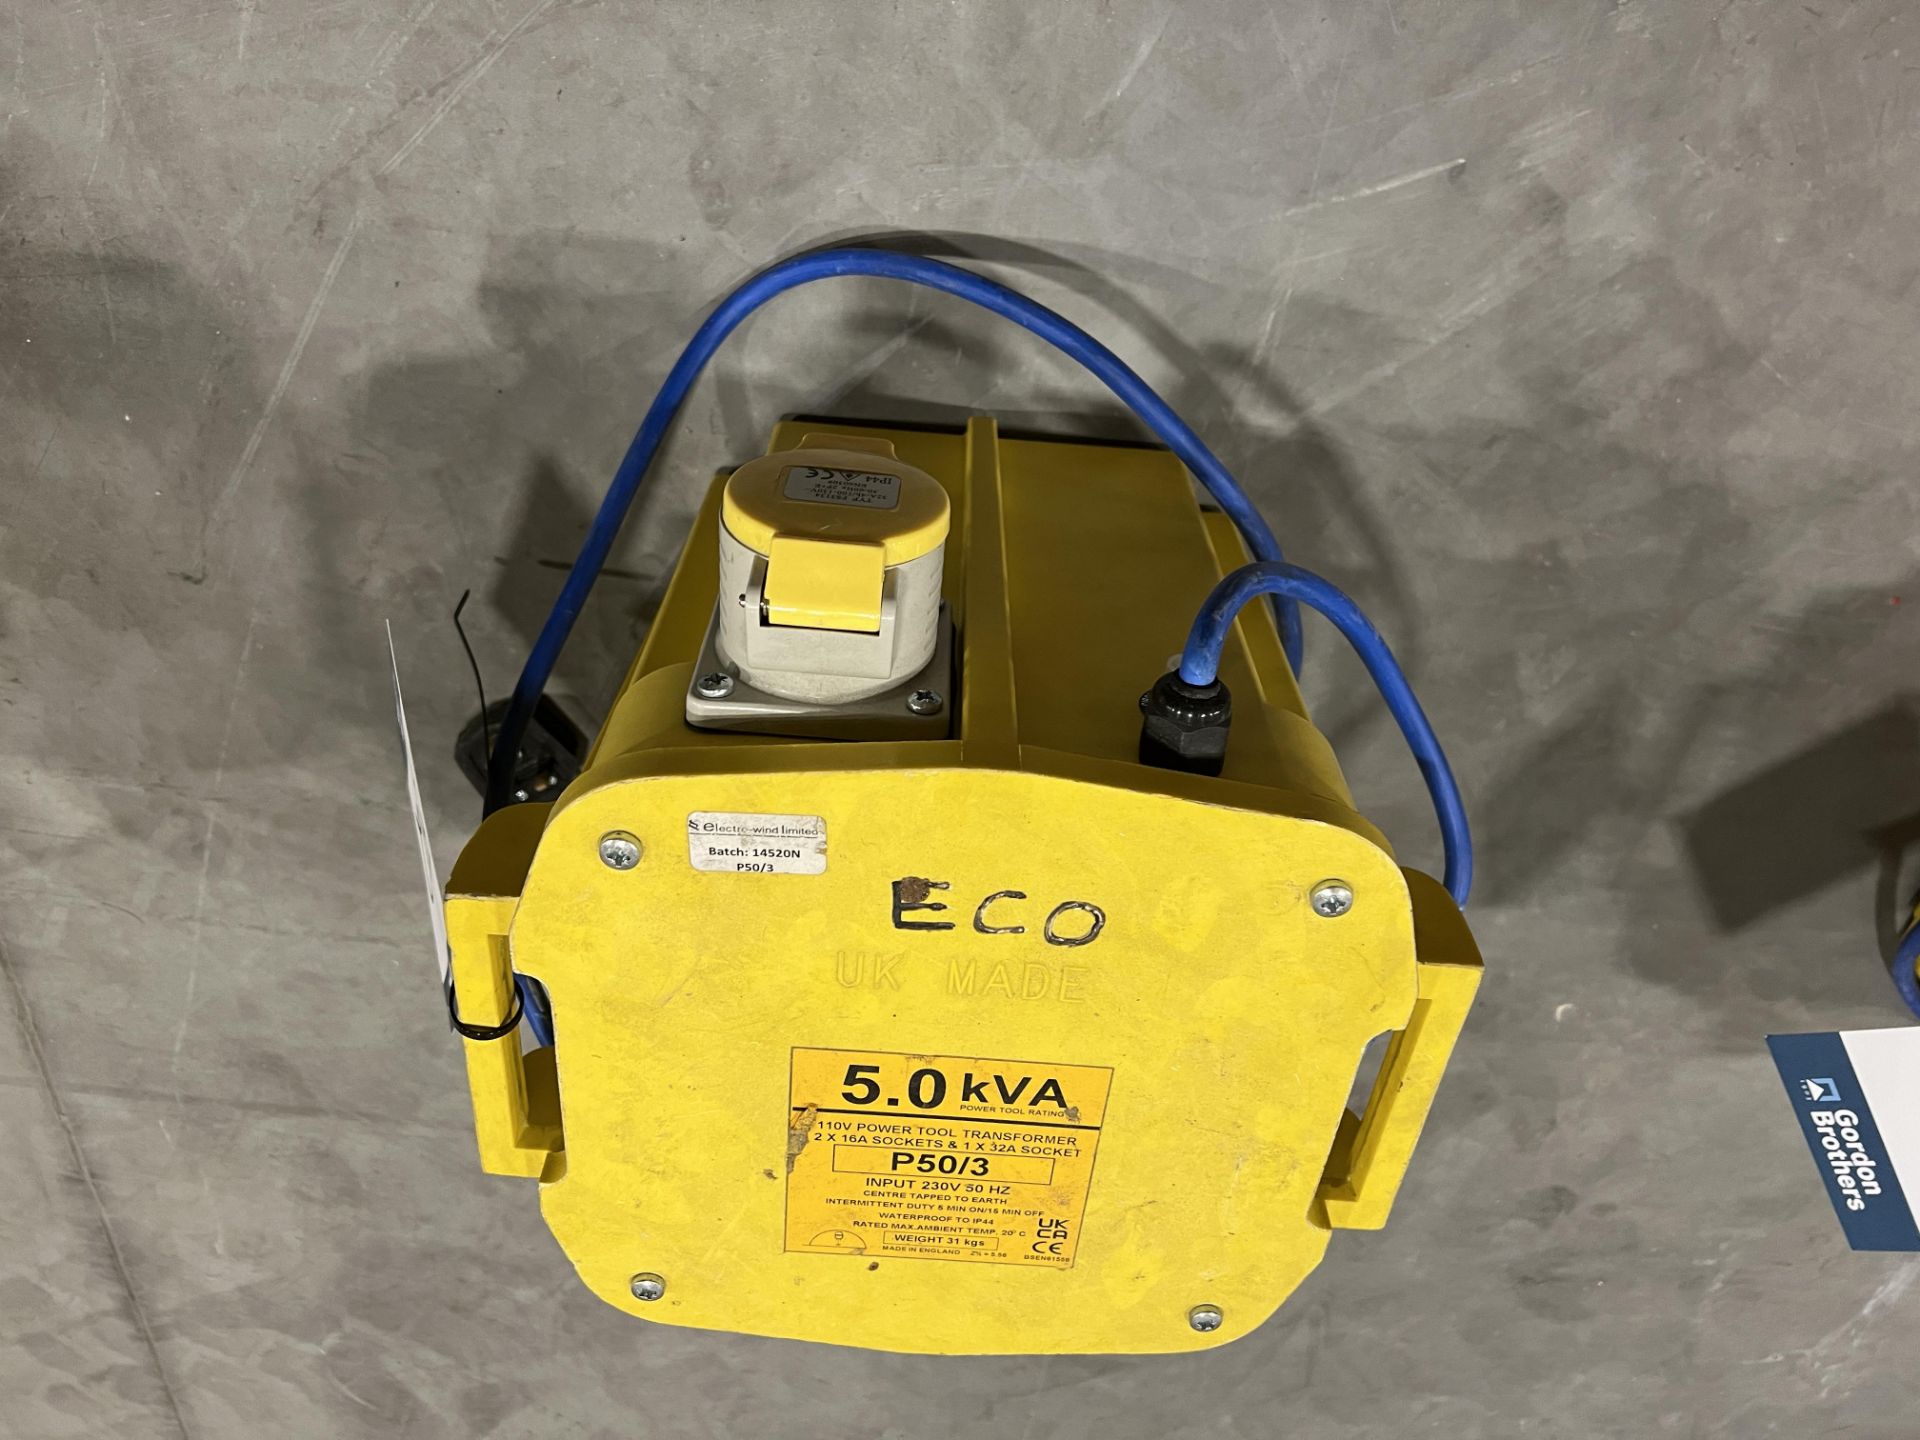 Electro - Wind Ltd P50/3 - 230 volt to 110 volt power tool stepdown transformer duty rated at - Image 4 of 5